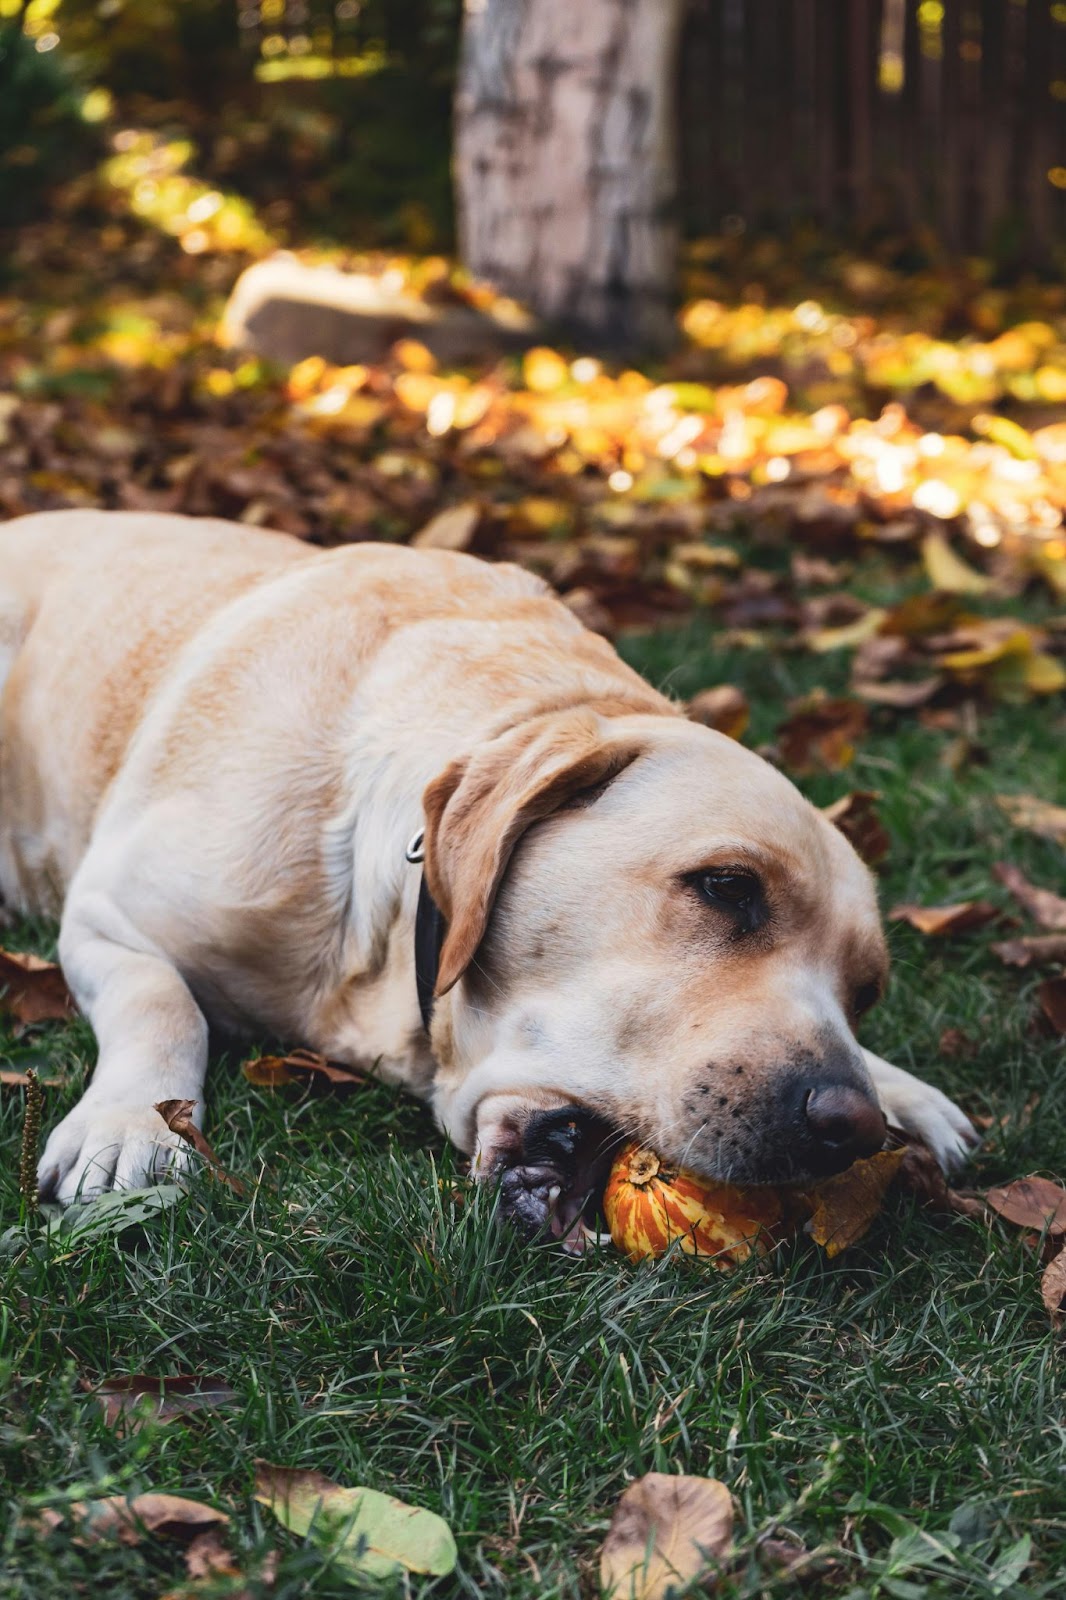 Effective home remedies to stop dog from eating poop